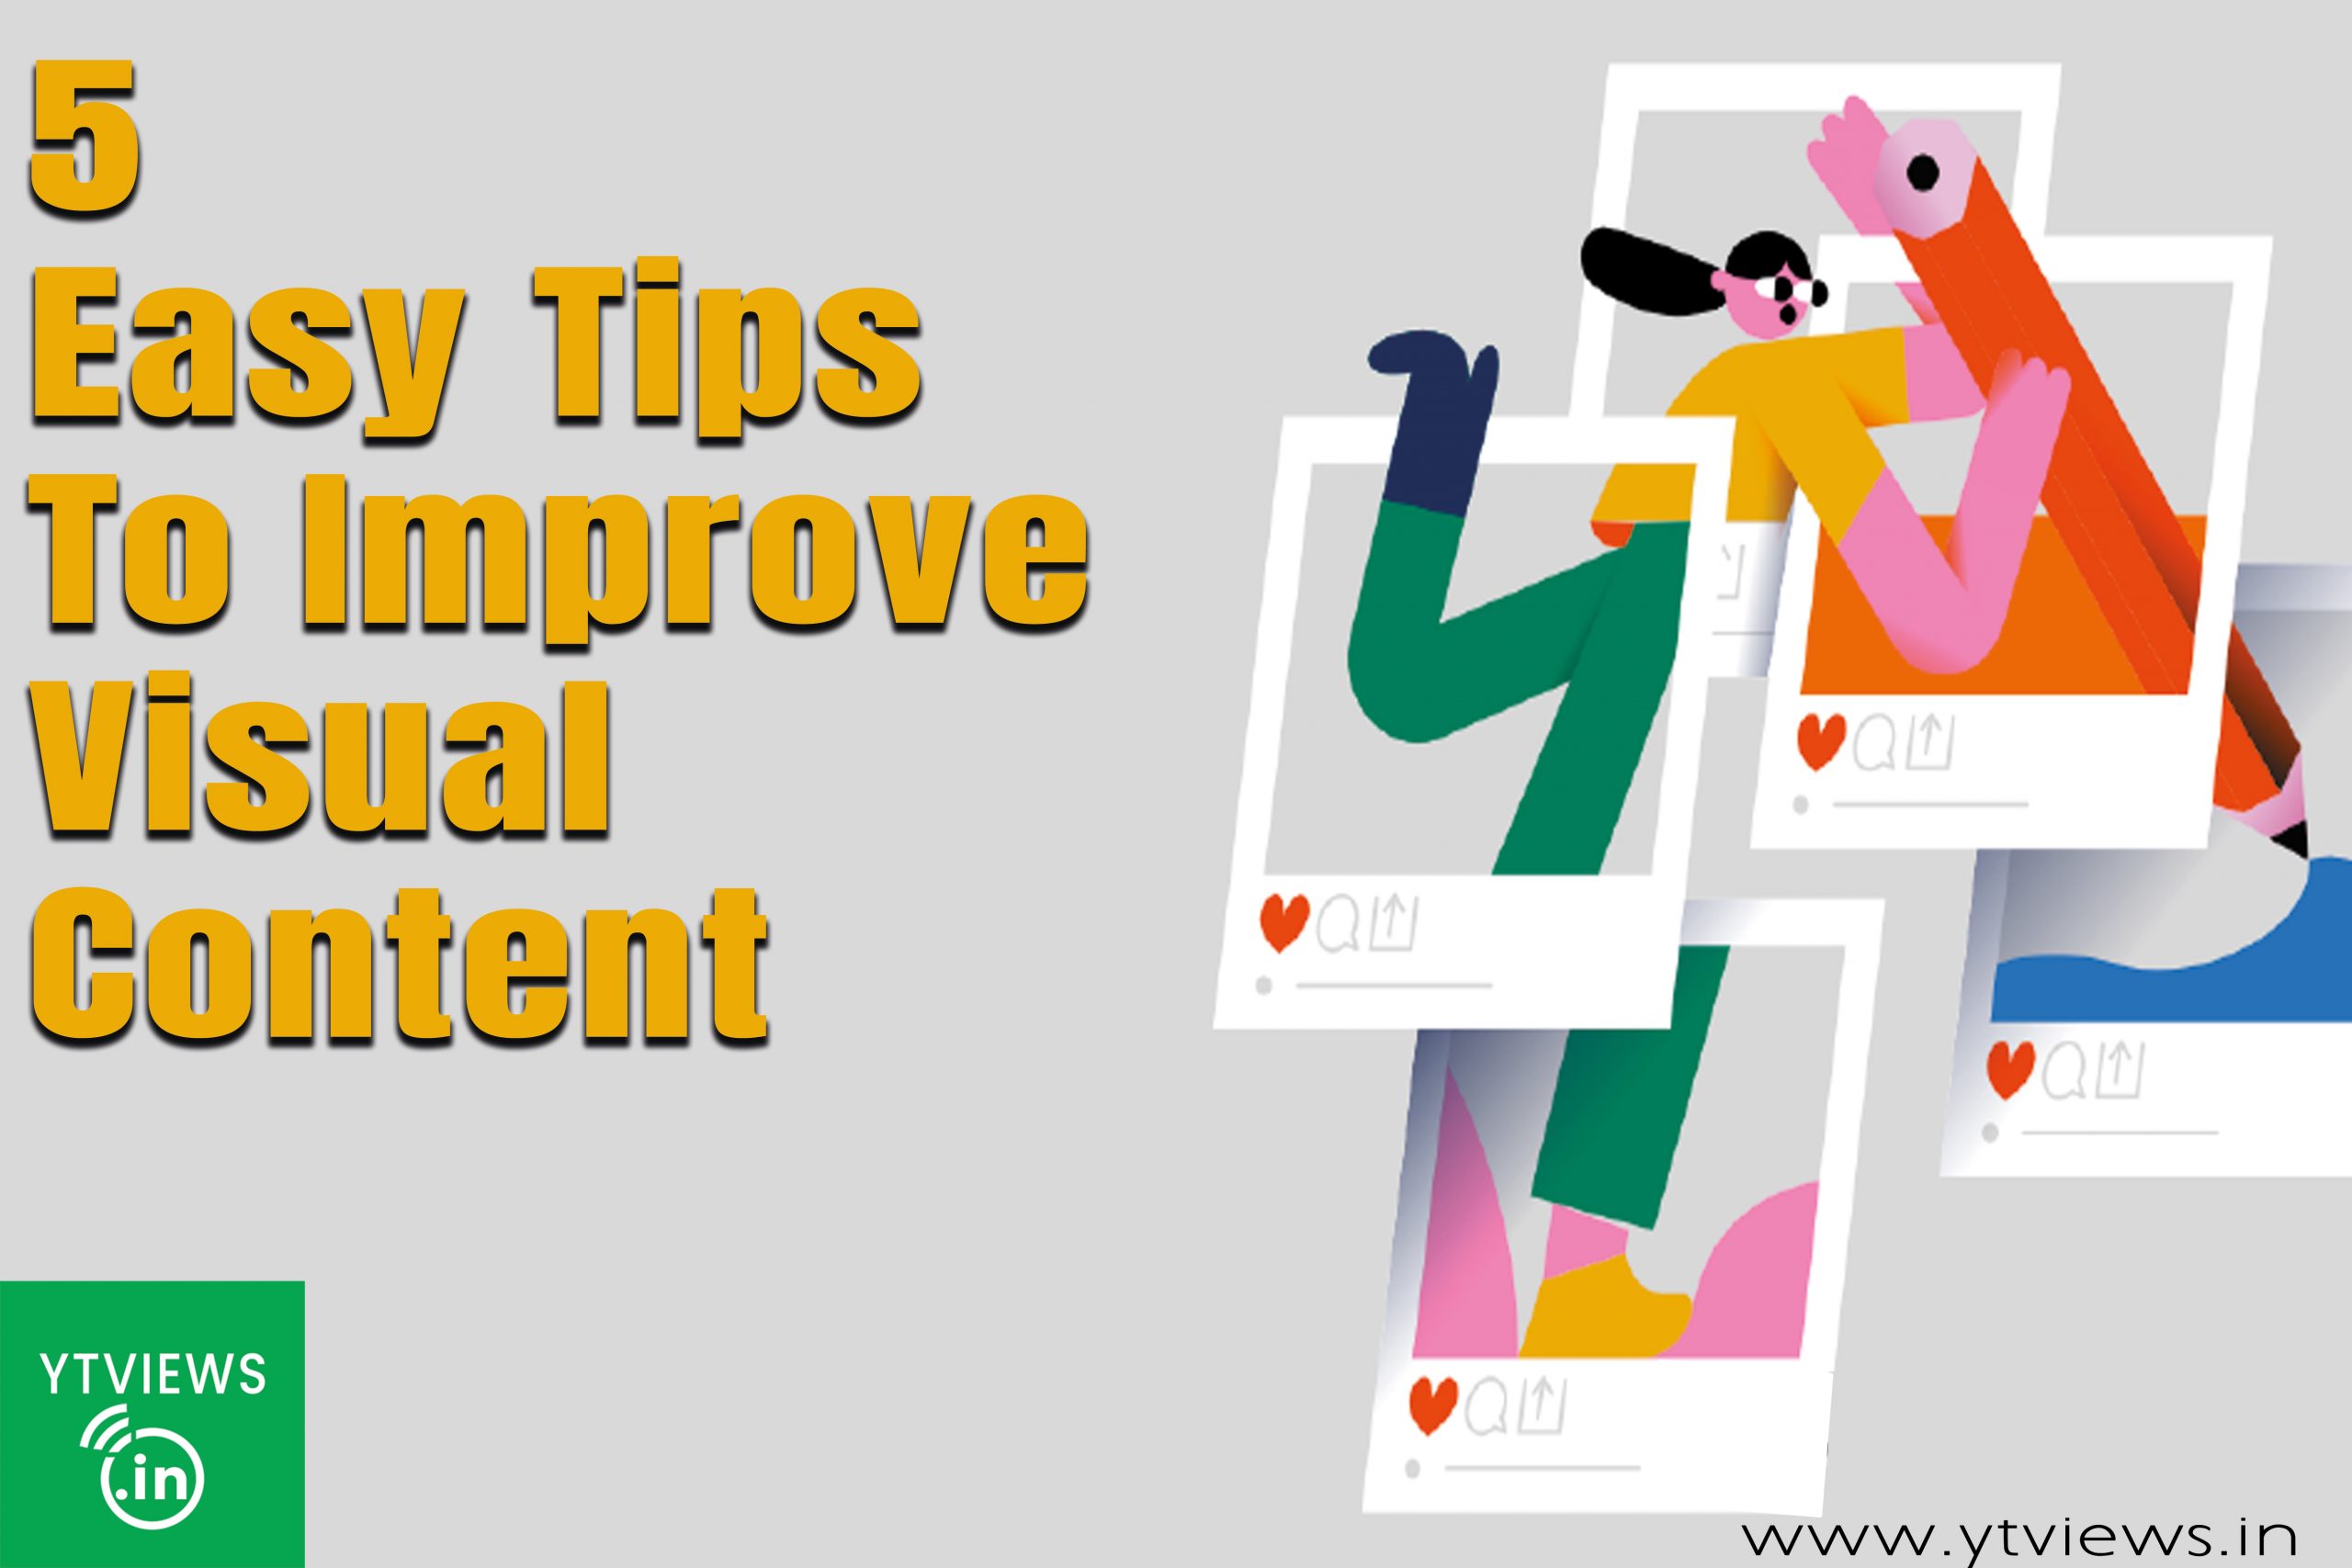 5 easy tips to improve your visual content